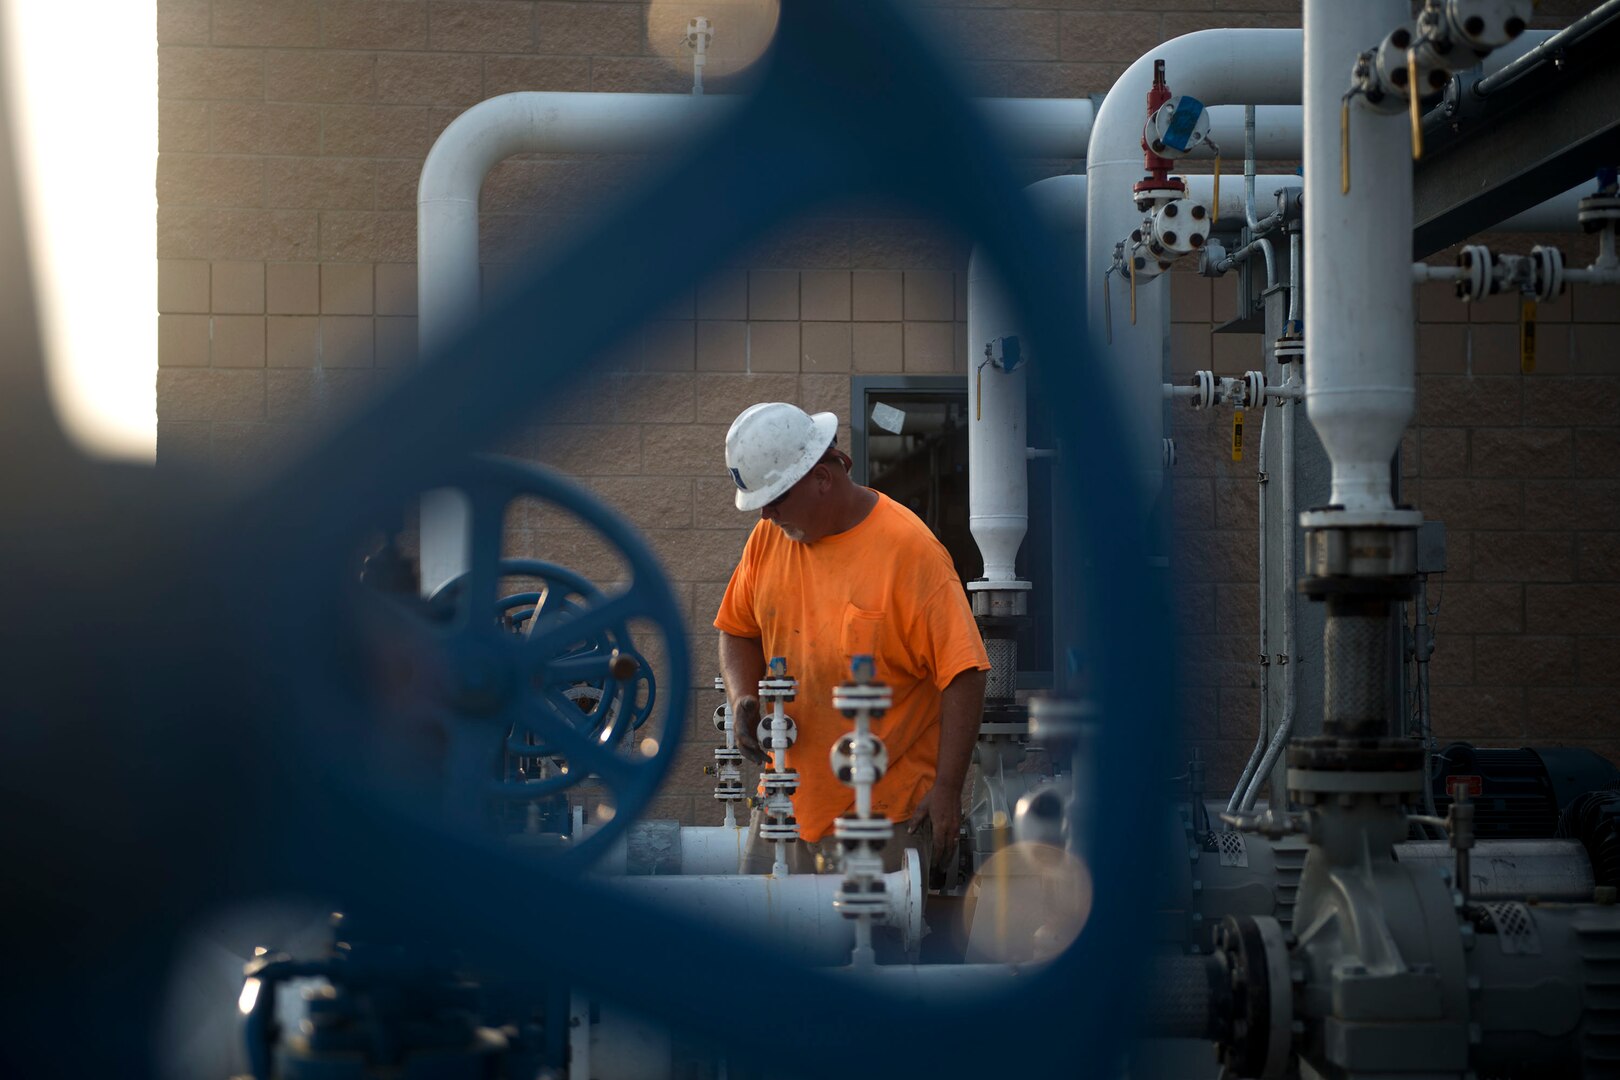 Kevin Kinsman, general foreman of pipefitting, constructs a gasket for the pump house in the 23d Logistics Readiness Squadron (LRS) fuel yard, July 18, 2018, at Moody Air Force Base, Ga. For the first time since the 1950s, the 23d LRS is modernizing the yard to improve fuel efficiency to enhance operations. (U.S. Air Force photo by Airman 1st Class Erick Requadt)